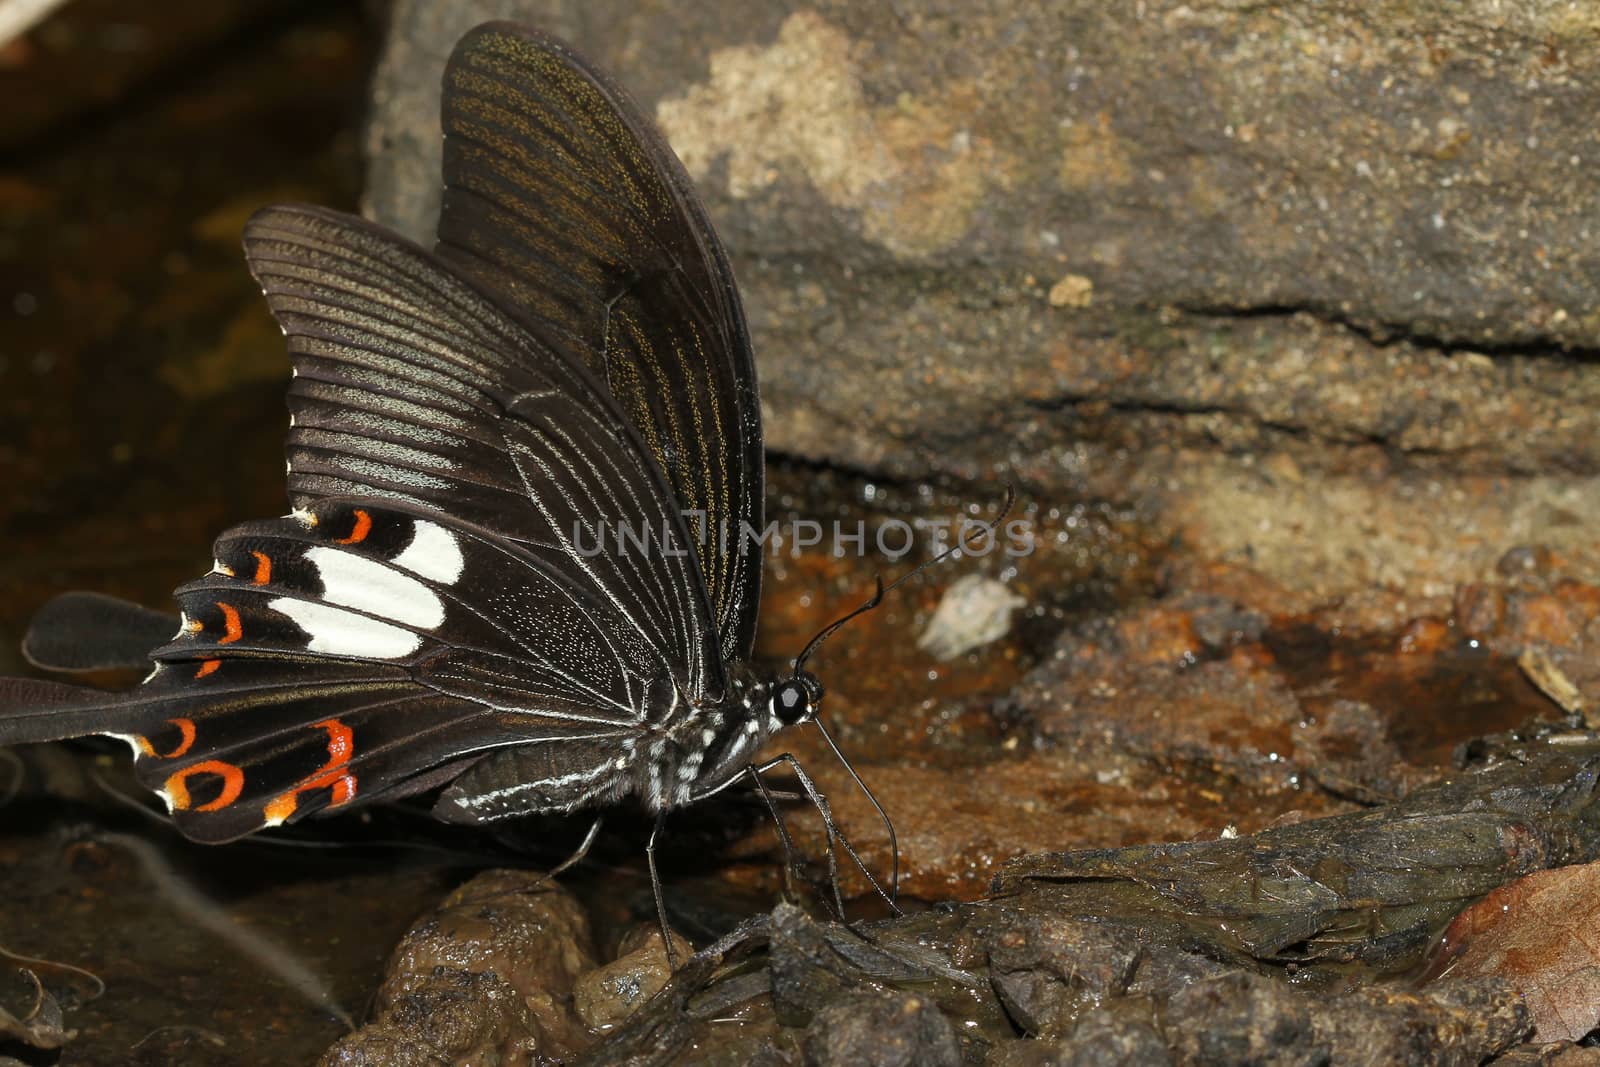 black butterfly in nature waterfall thailand